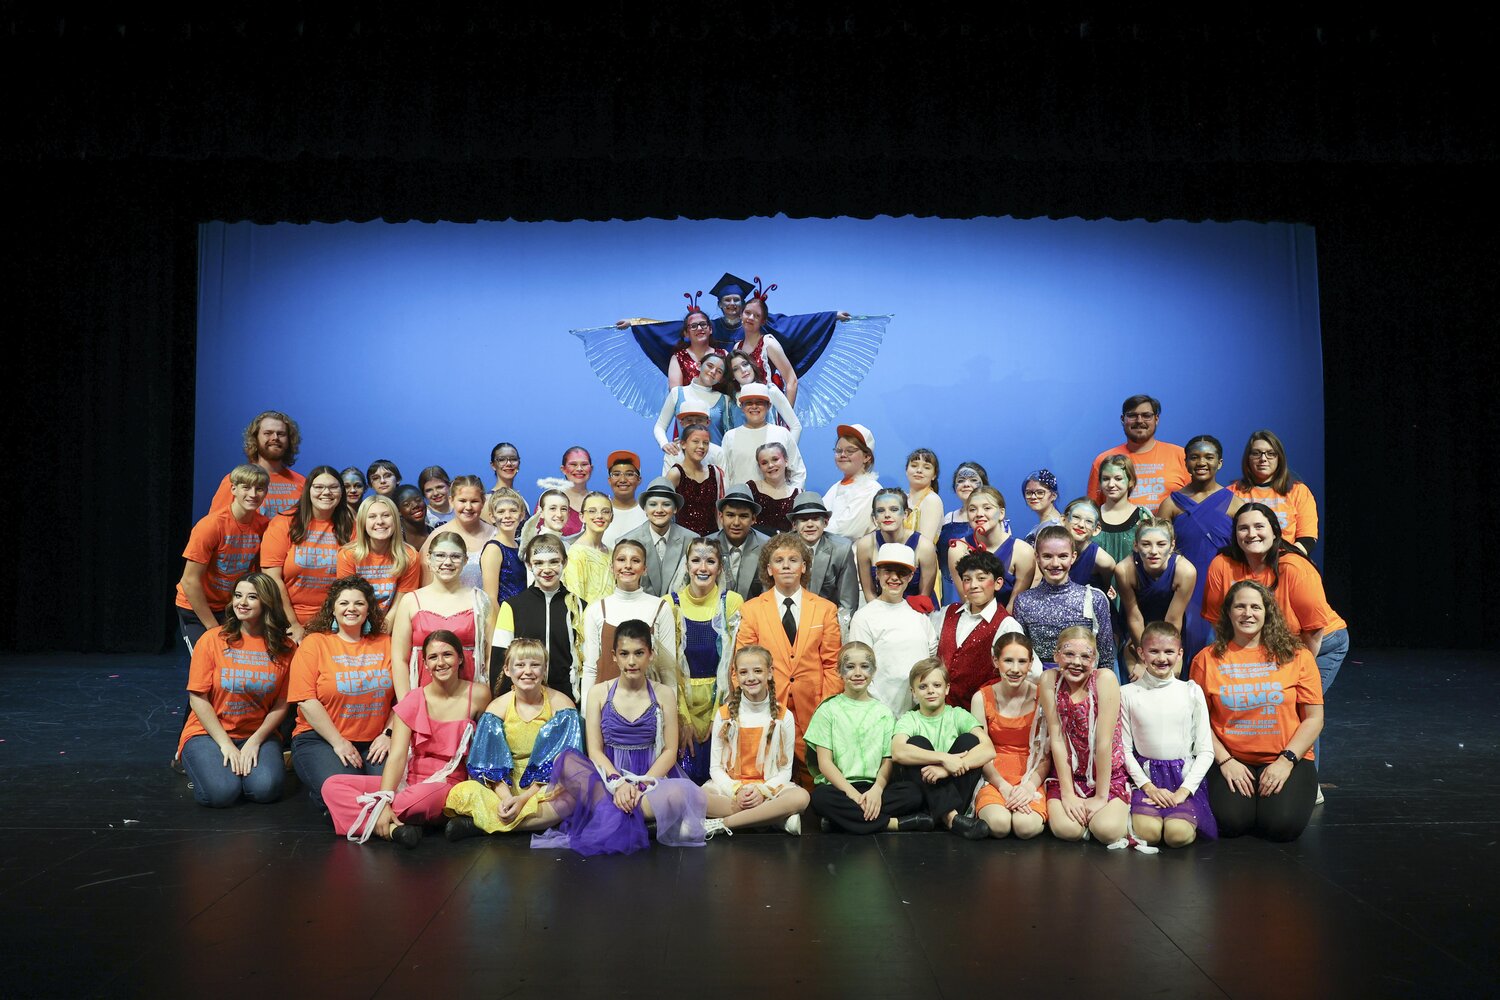 Crawfordsville Middle School students will bring “Finding Nemo Jr.” to the stage today through Sunday. Show times are 7 p.m. today and Saturday and 2:30 p.m. Sunday at Crawfordsville High School.